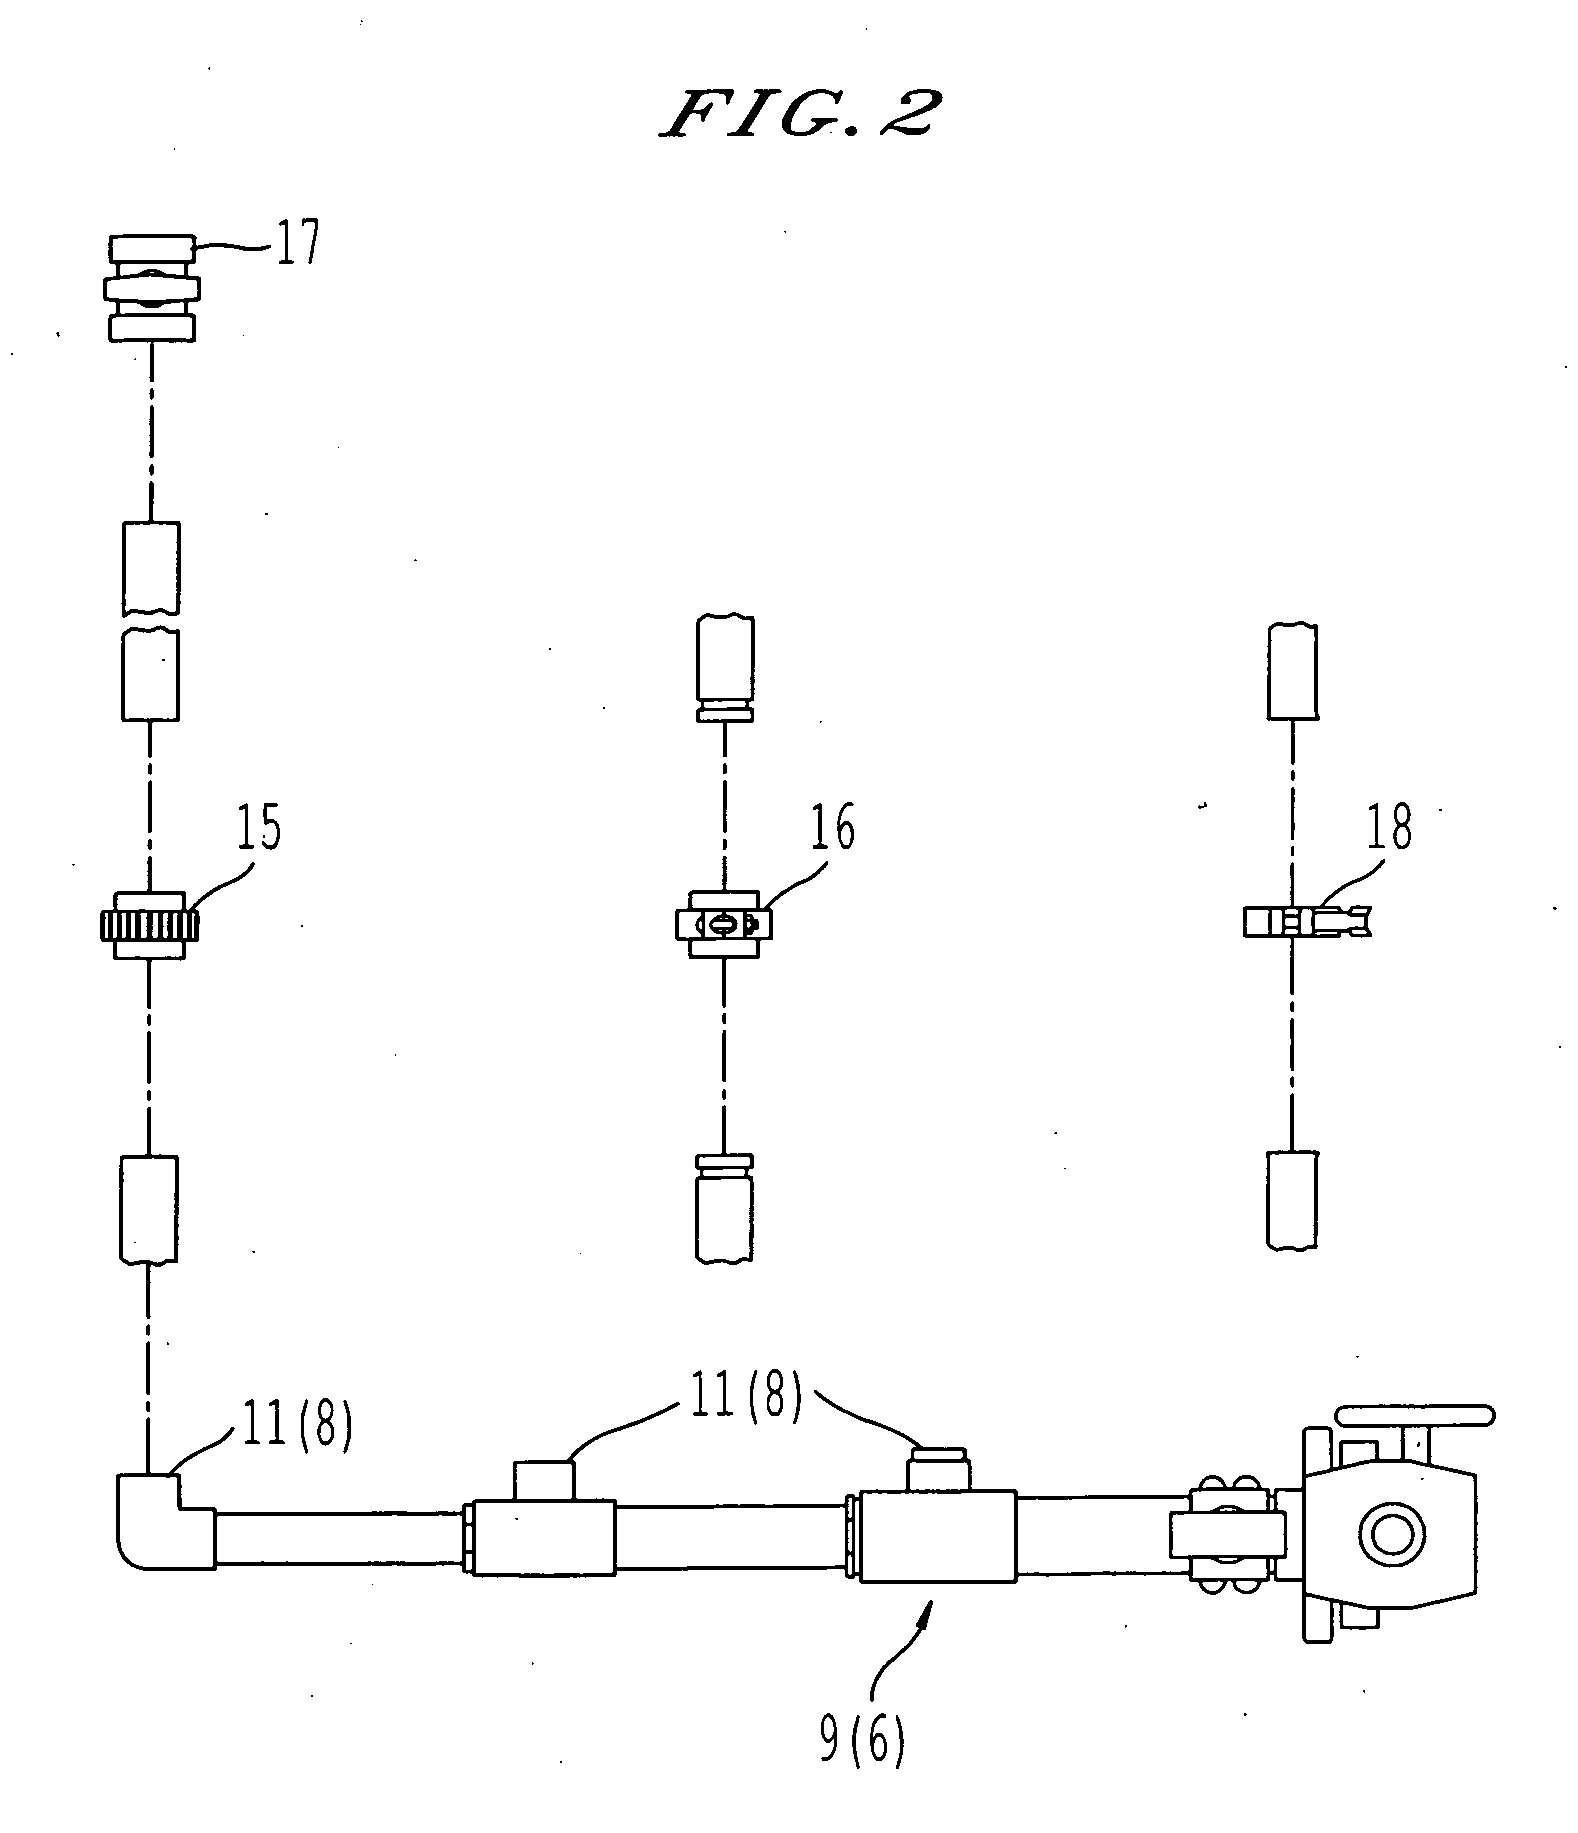 Modular fluid processing system with reversible plumbing connection